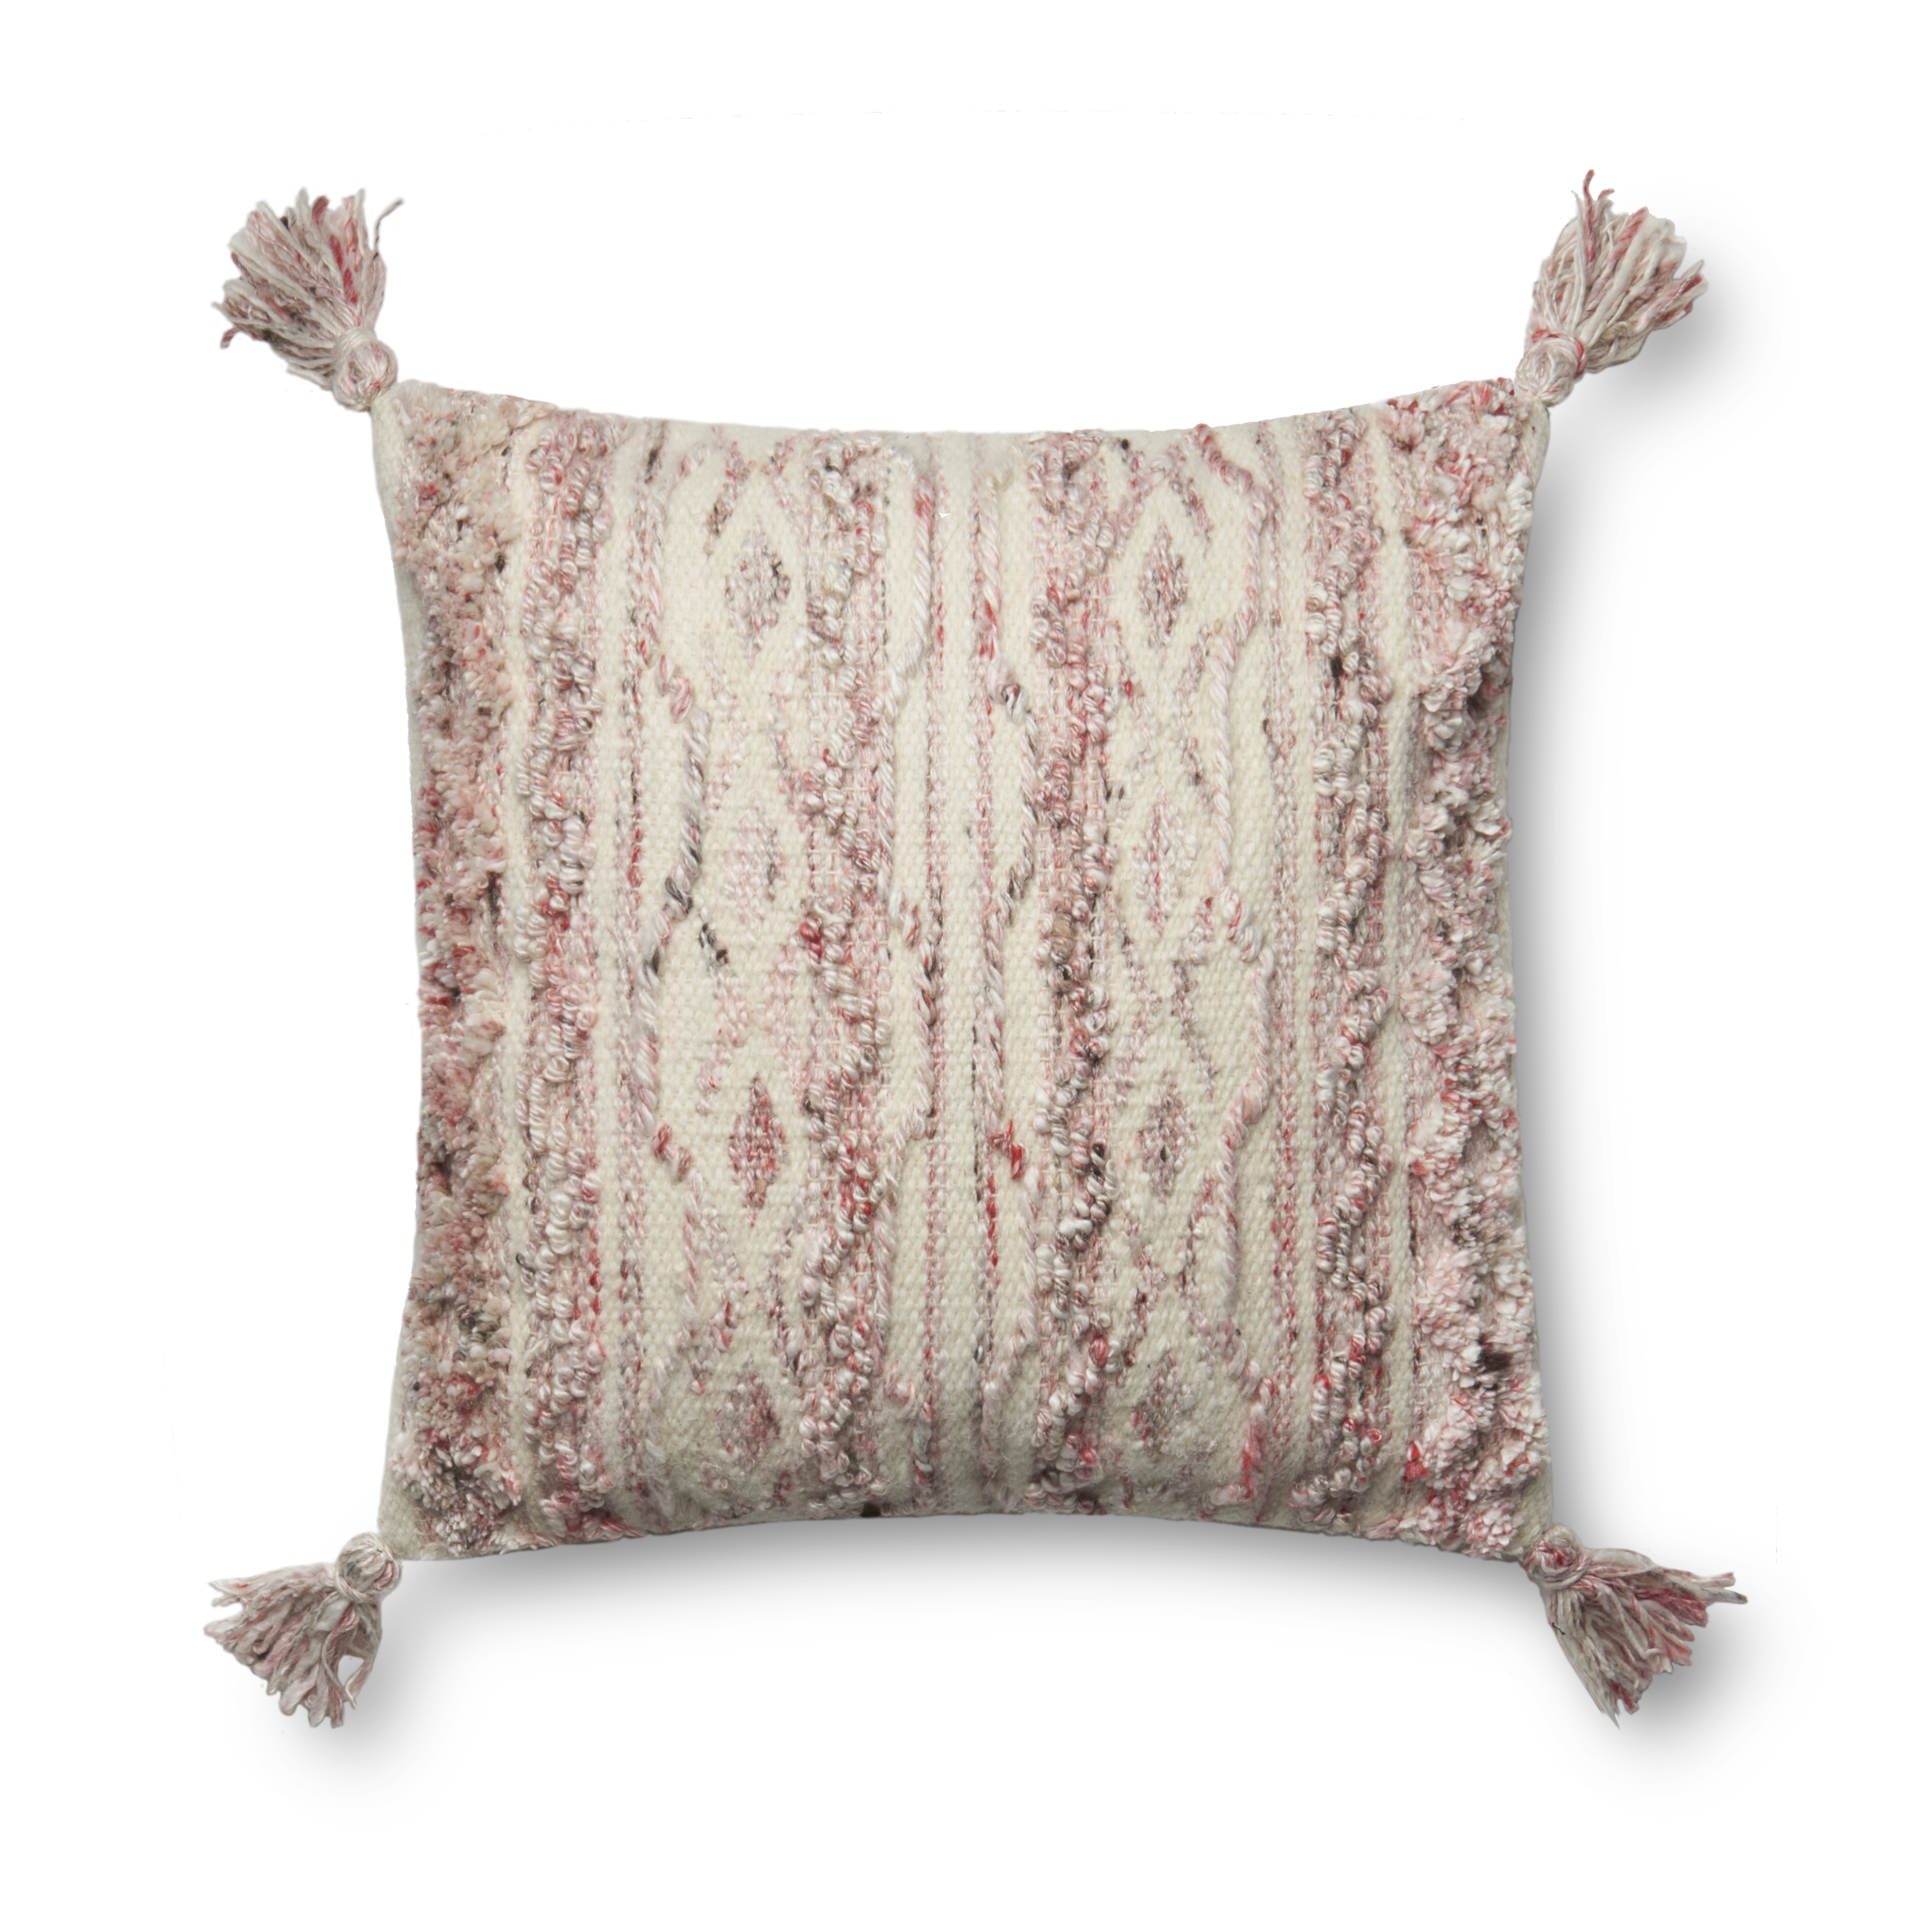 Justina Blakeney x Loloi Pillows P0643 Pink / Ivory 18" x 18" Cover Only - Image 0